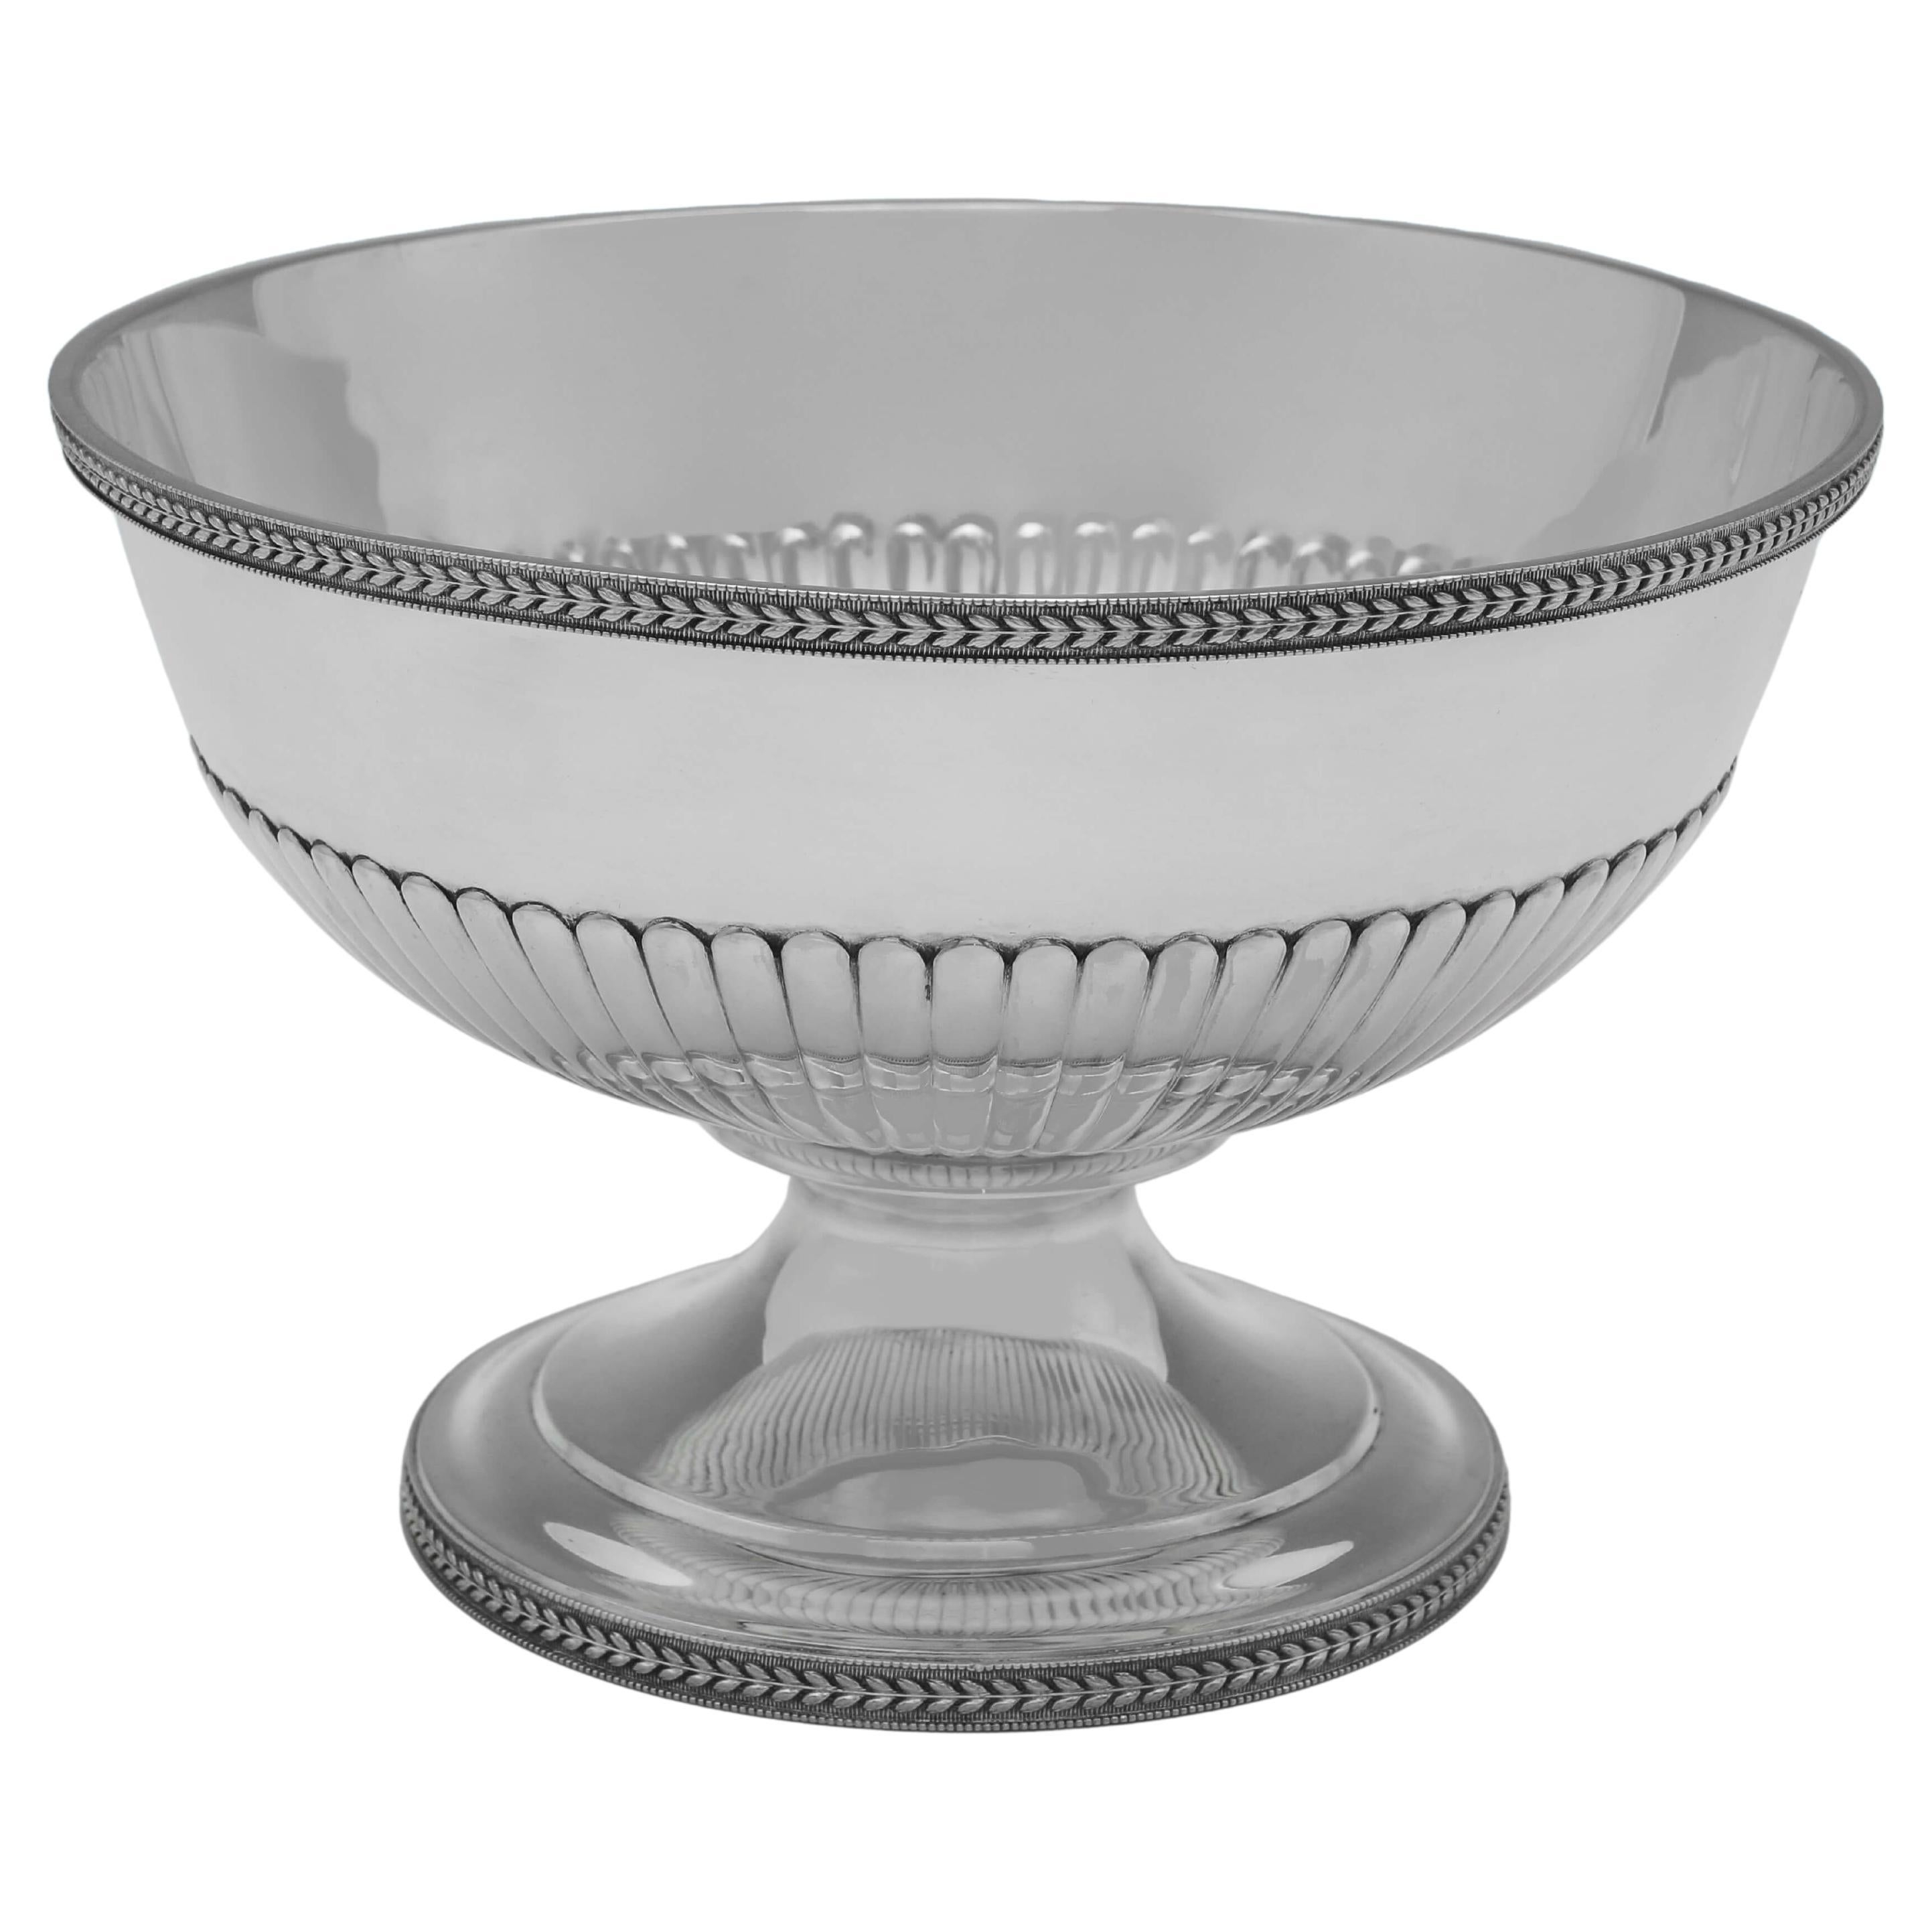 George III Period Sterling Silver Bowl - Made in 1803 For Sale